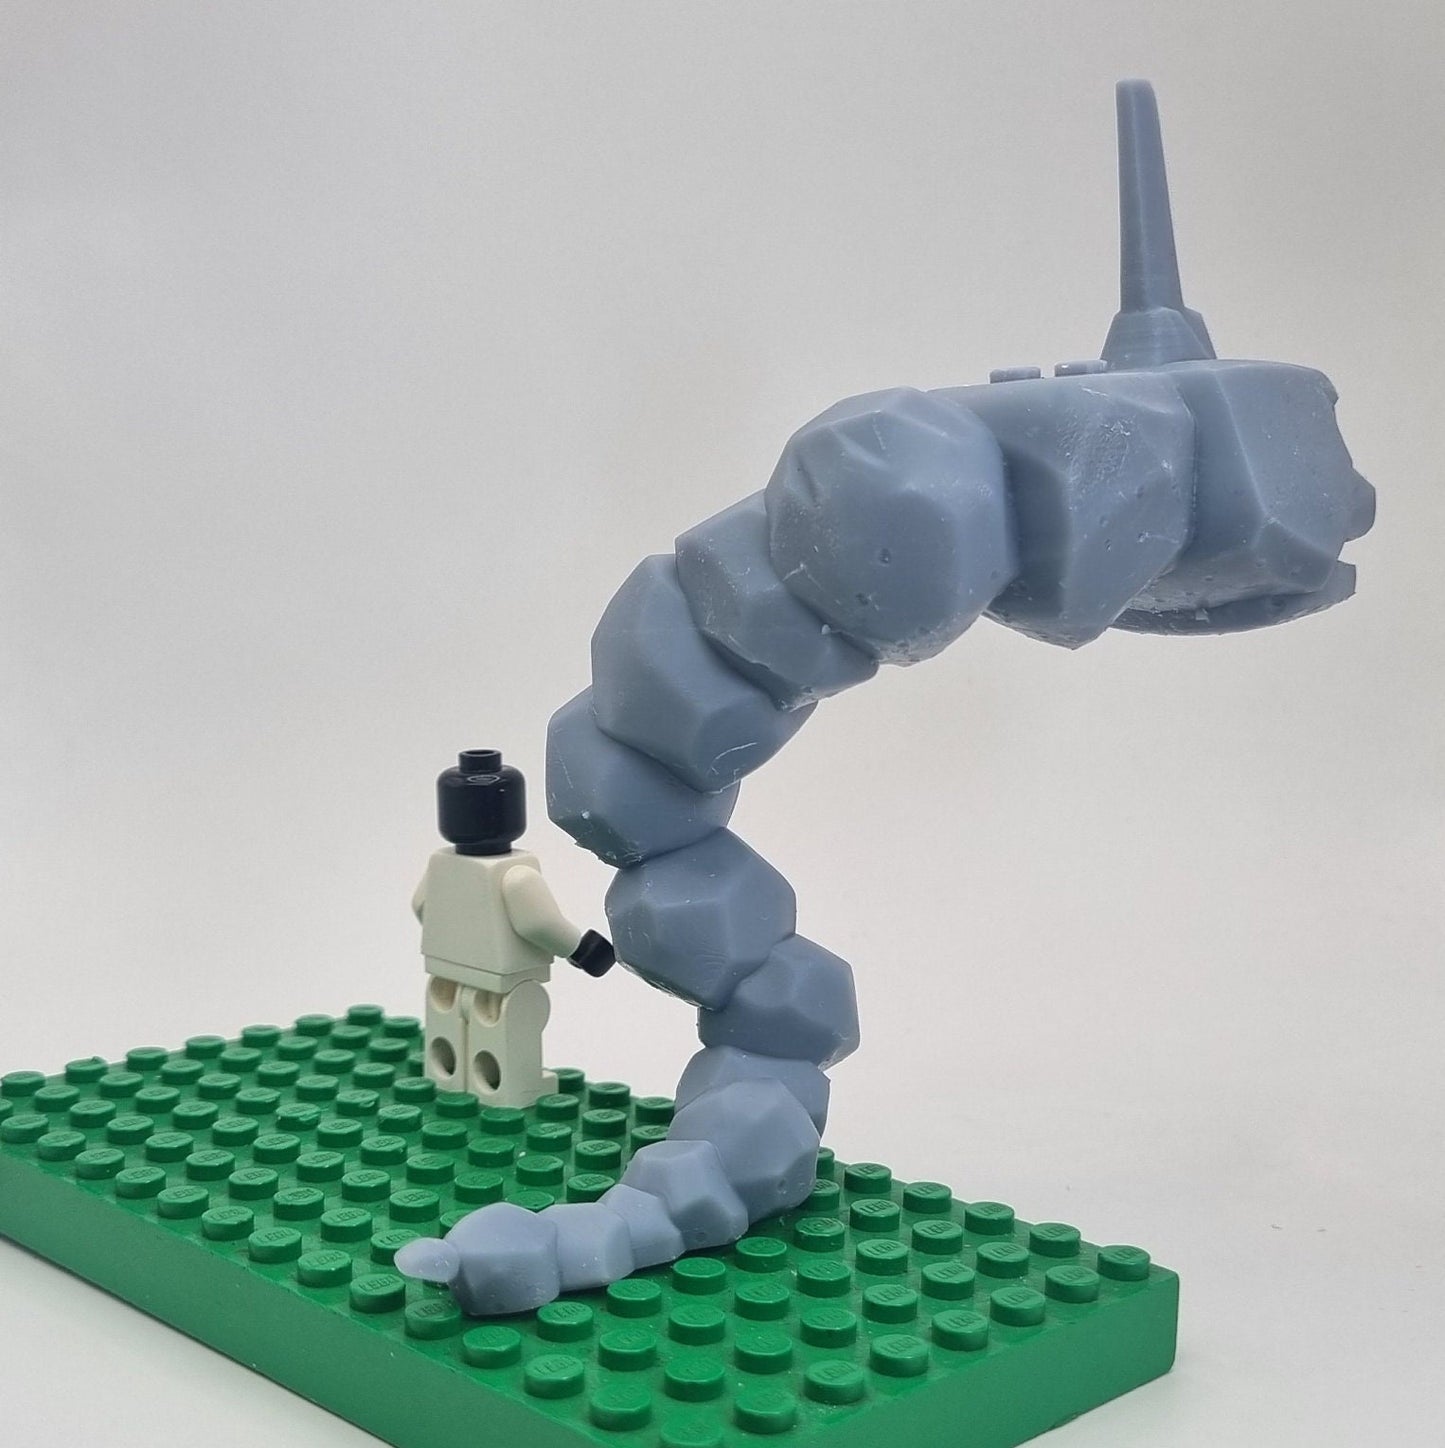 Custom 3D printed building toy animal to catch together clamped rocks!